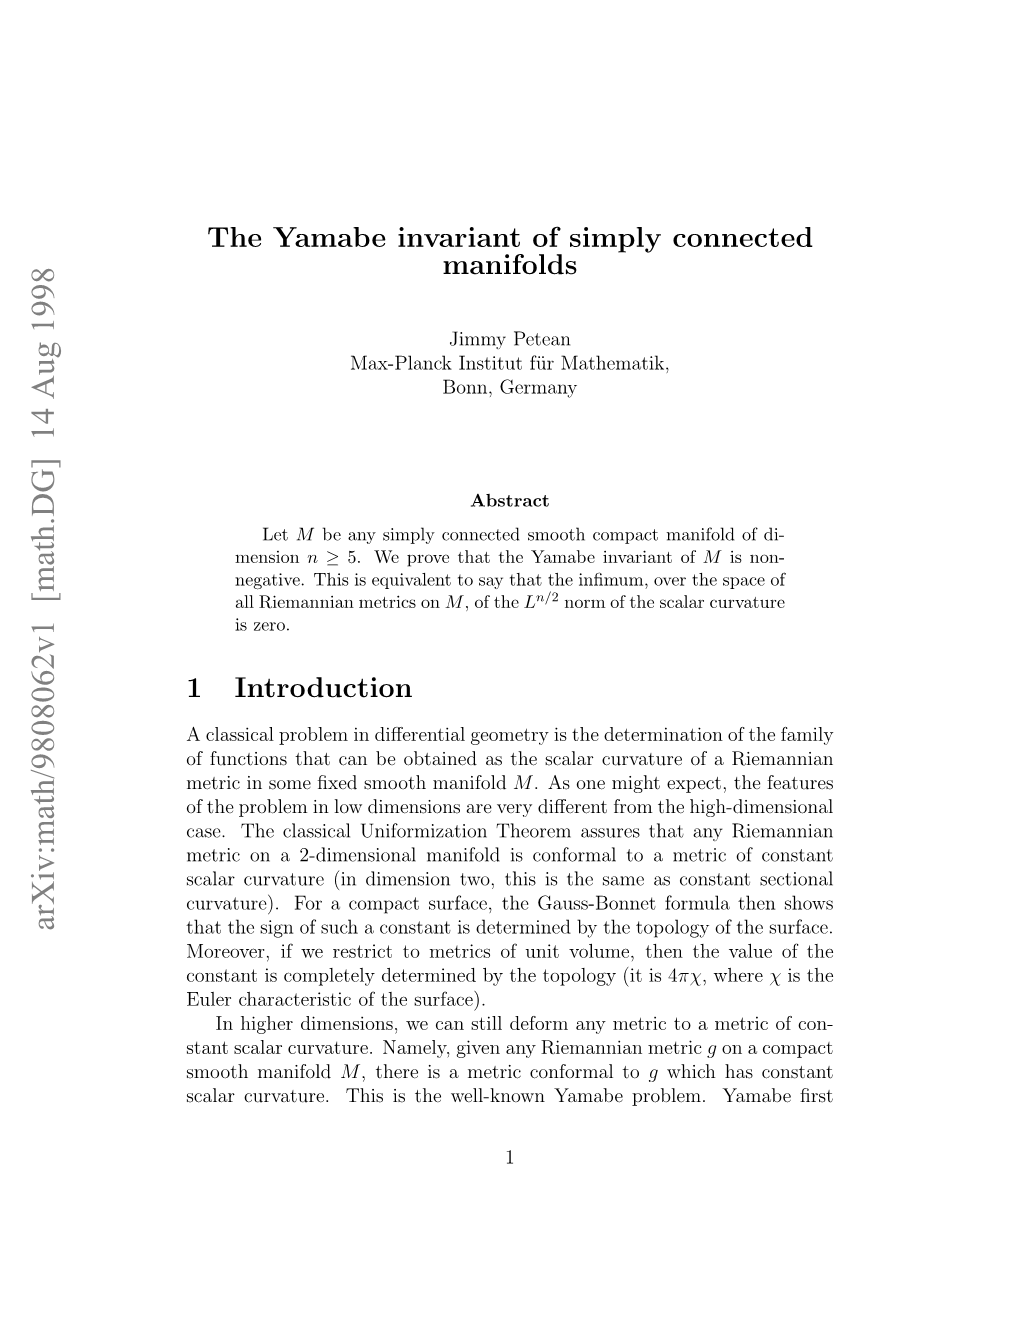 The Yamabe Invariant of Simply Connected Manifolds